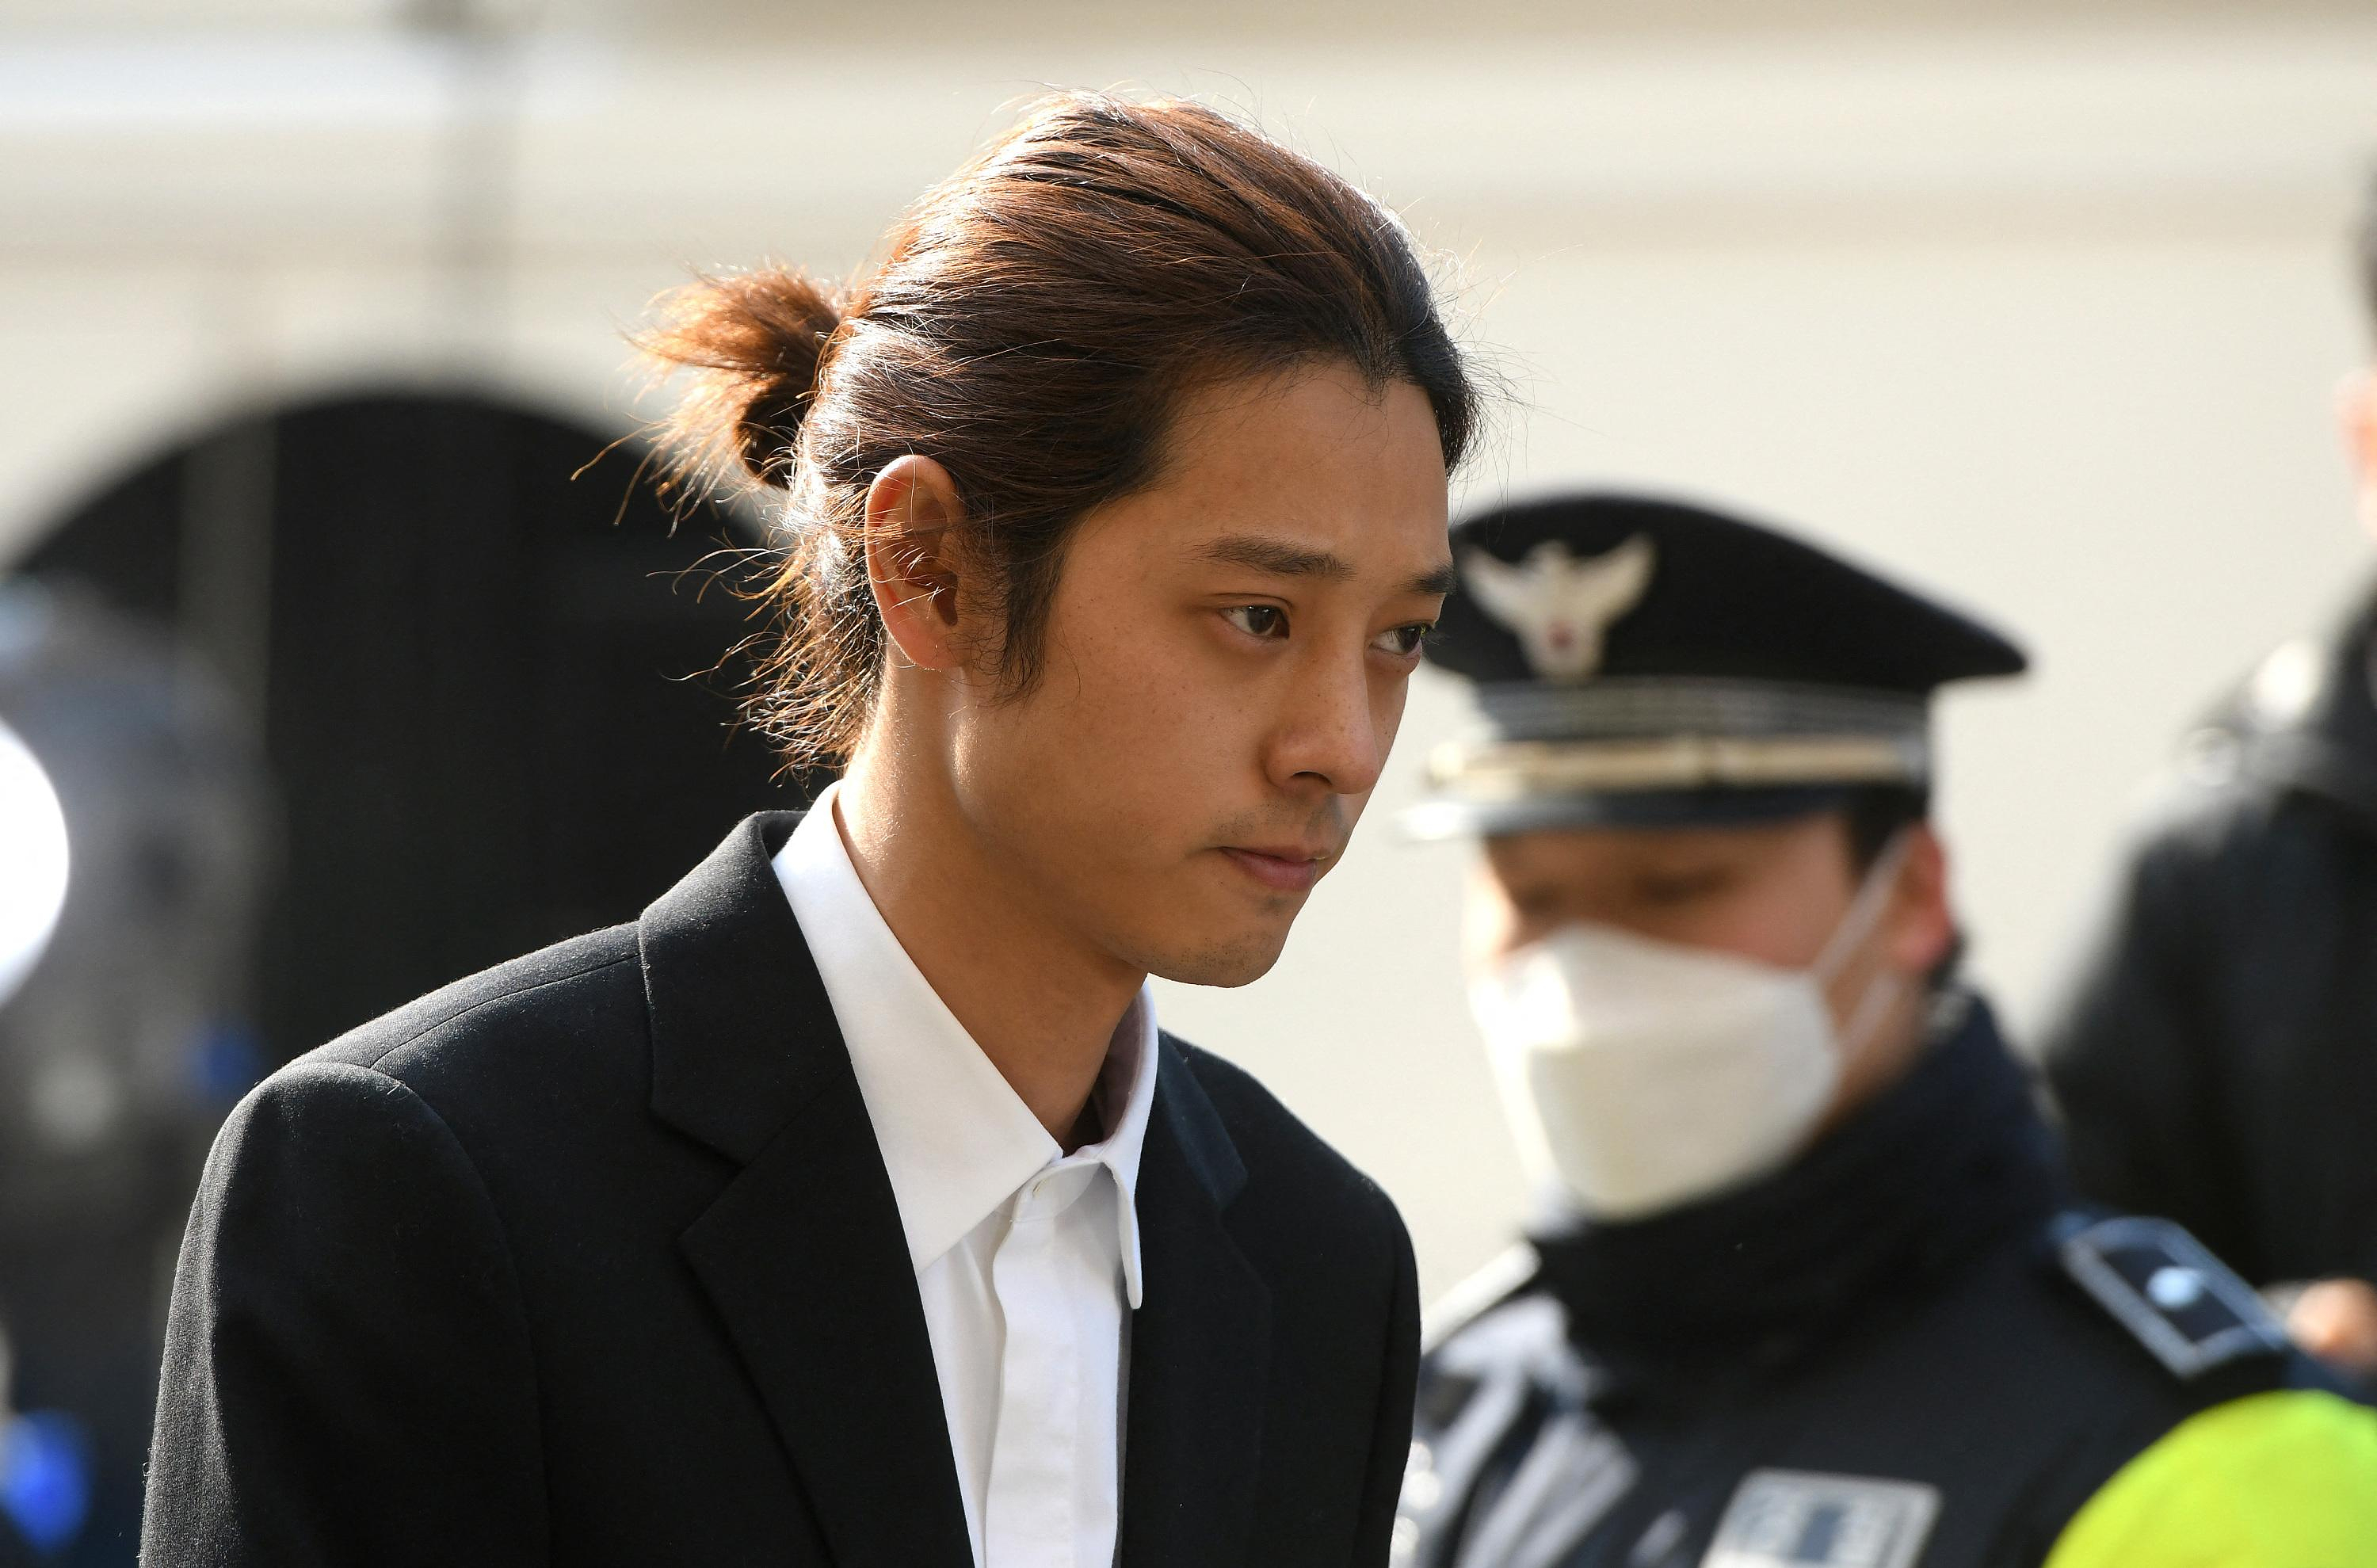 Jung Joon-young, ex-K-pop star released after five years in prison for gang rape